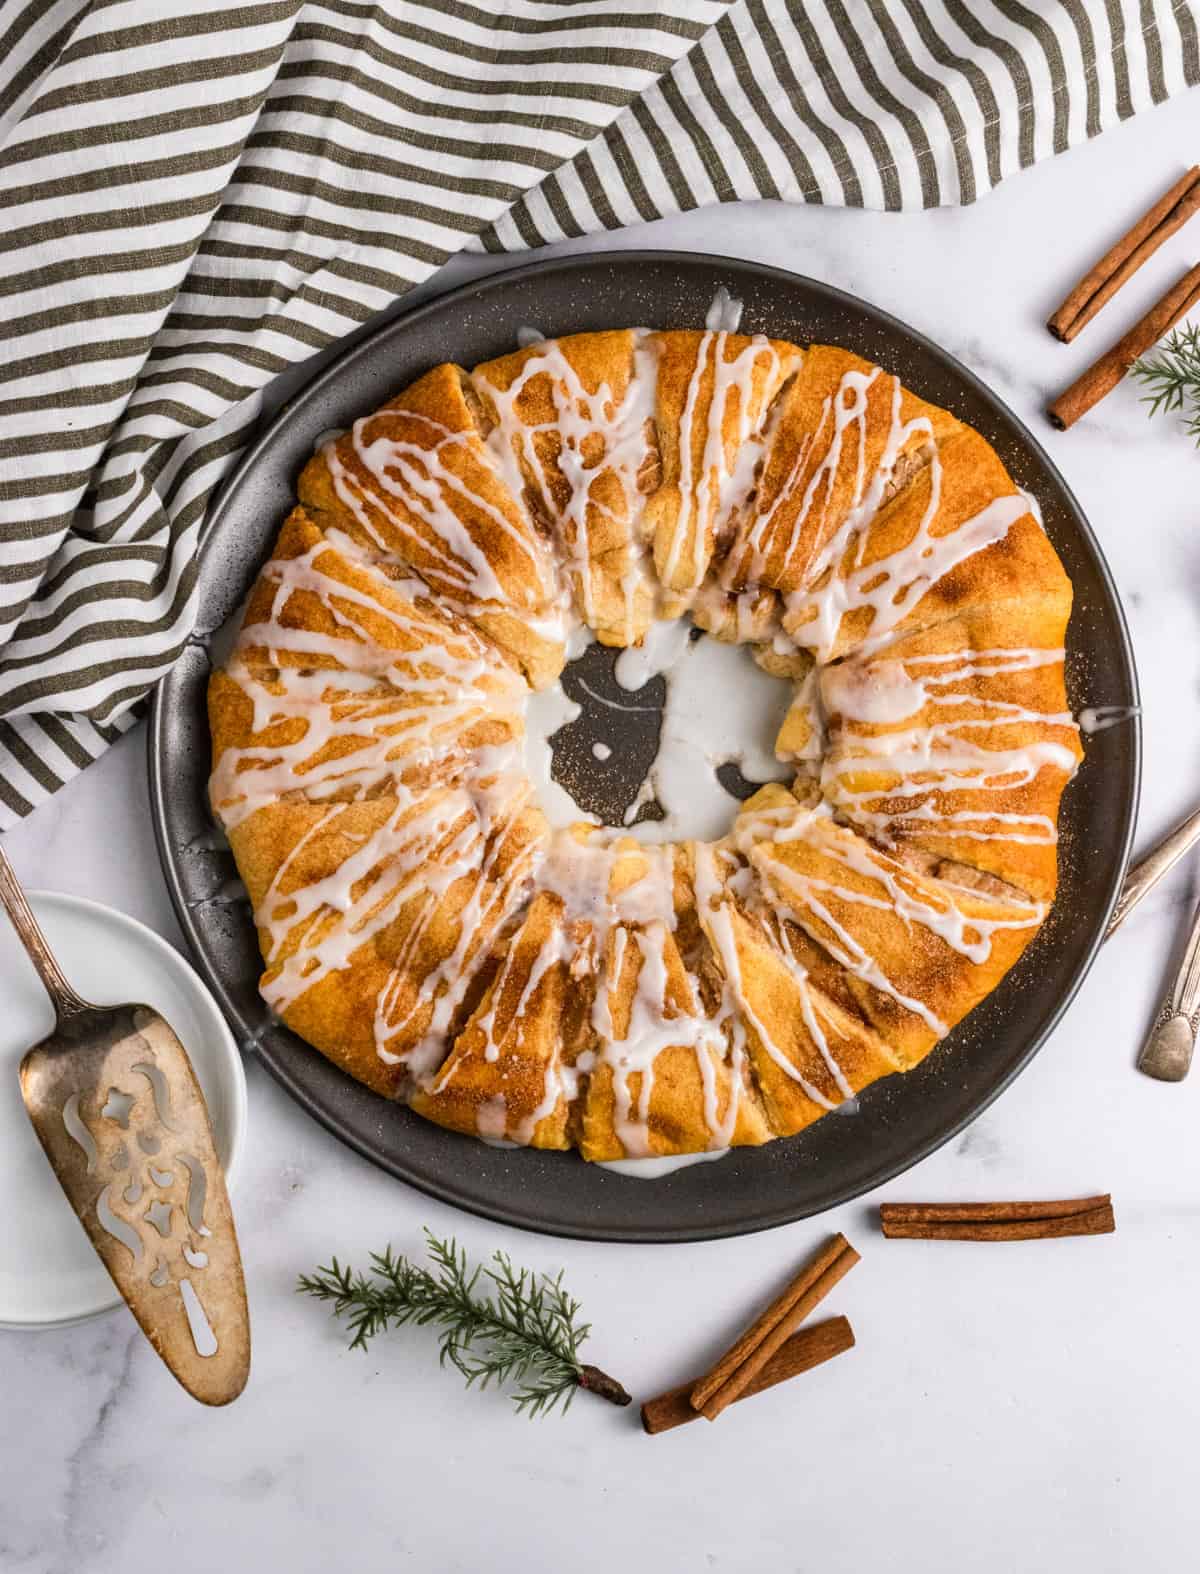 Crescent roll wreath with cinnamon and icing on pan. 
